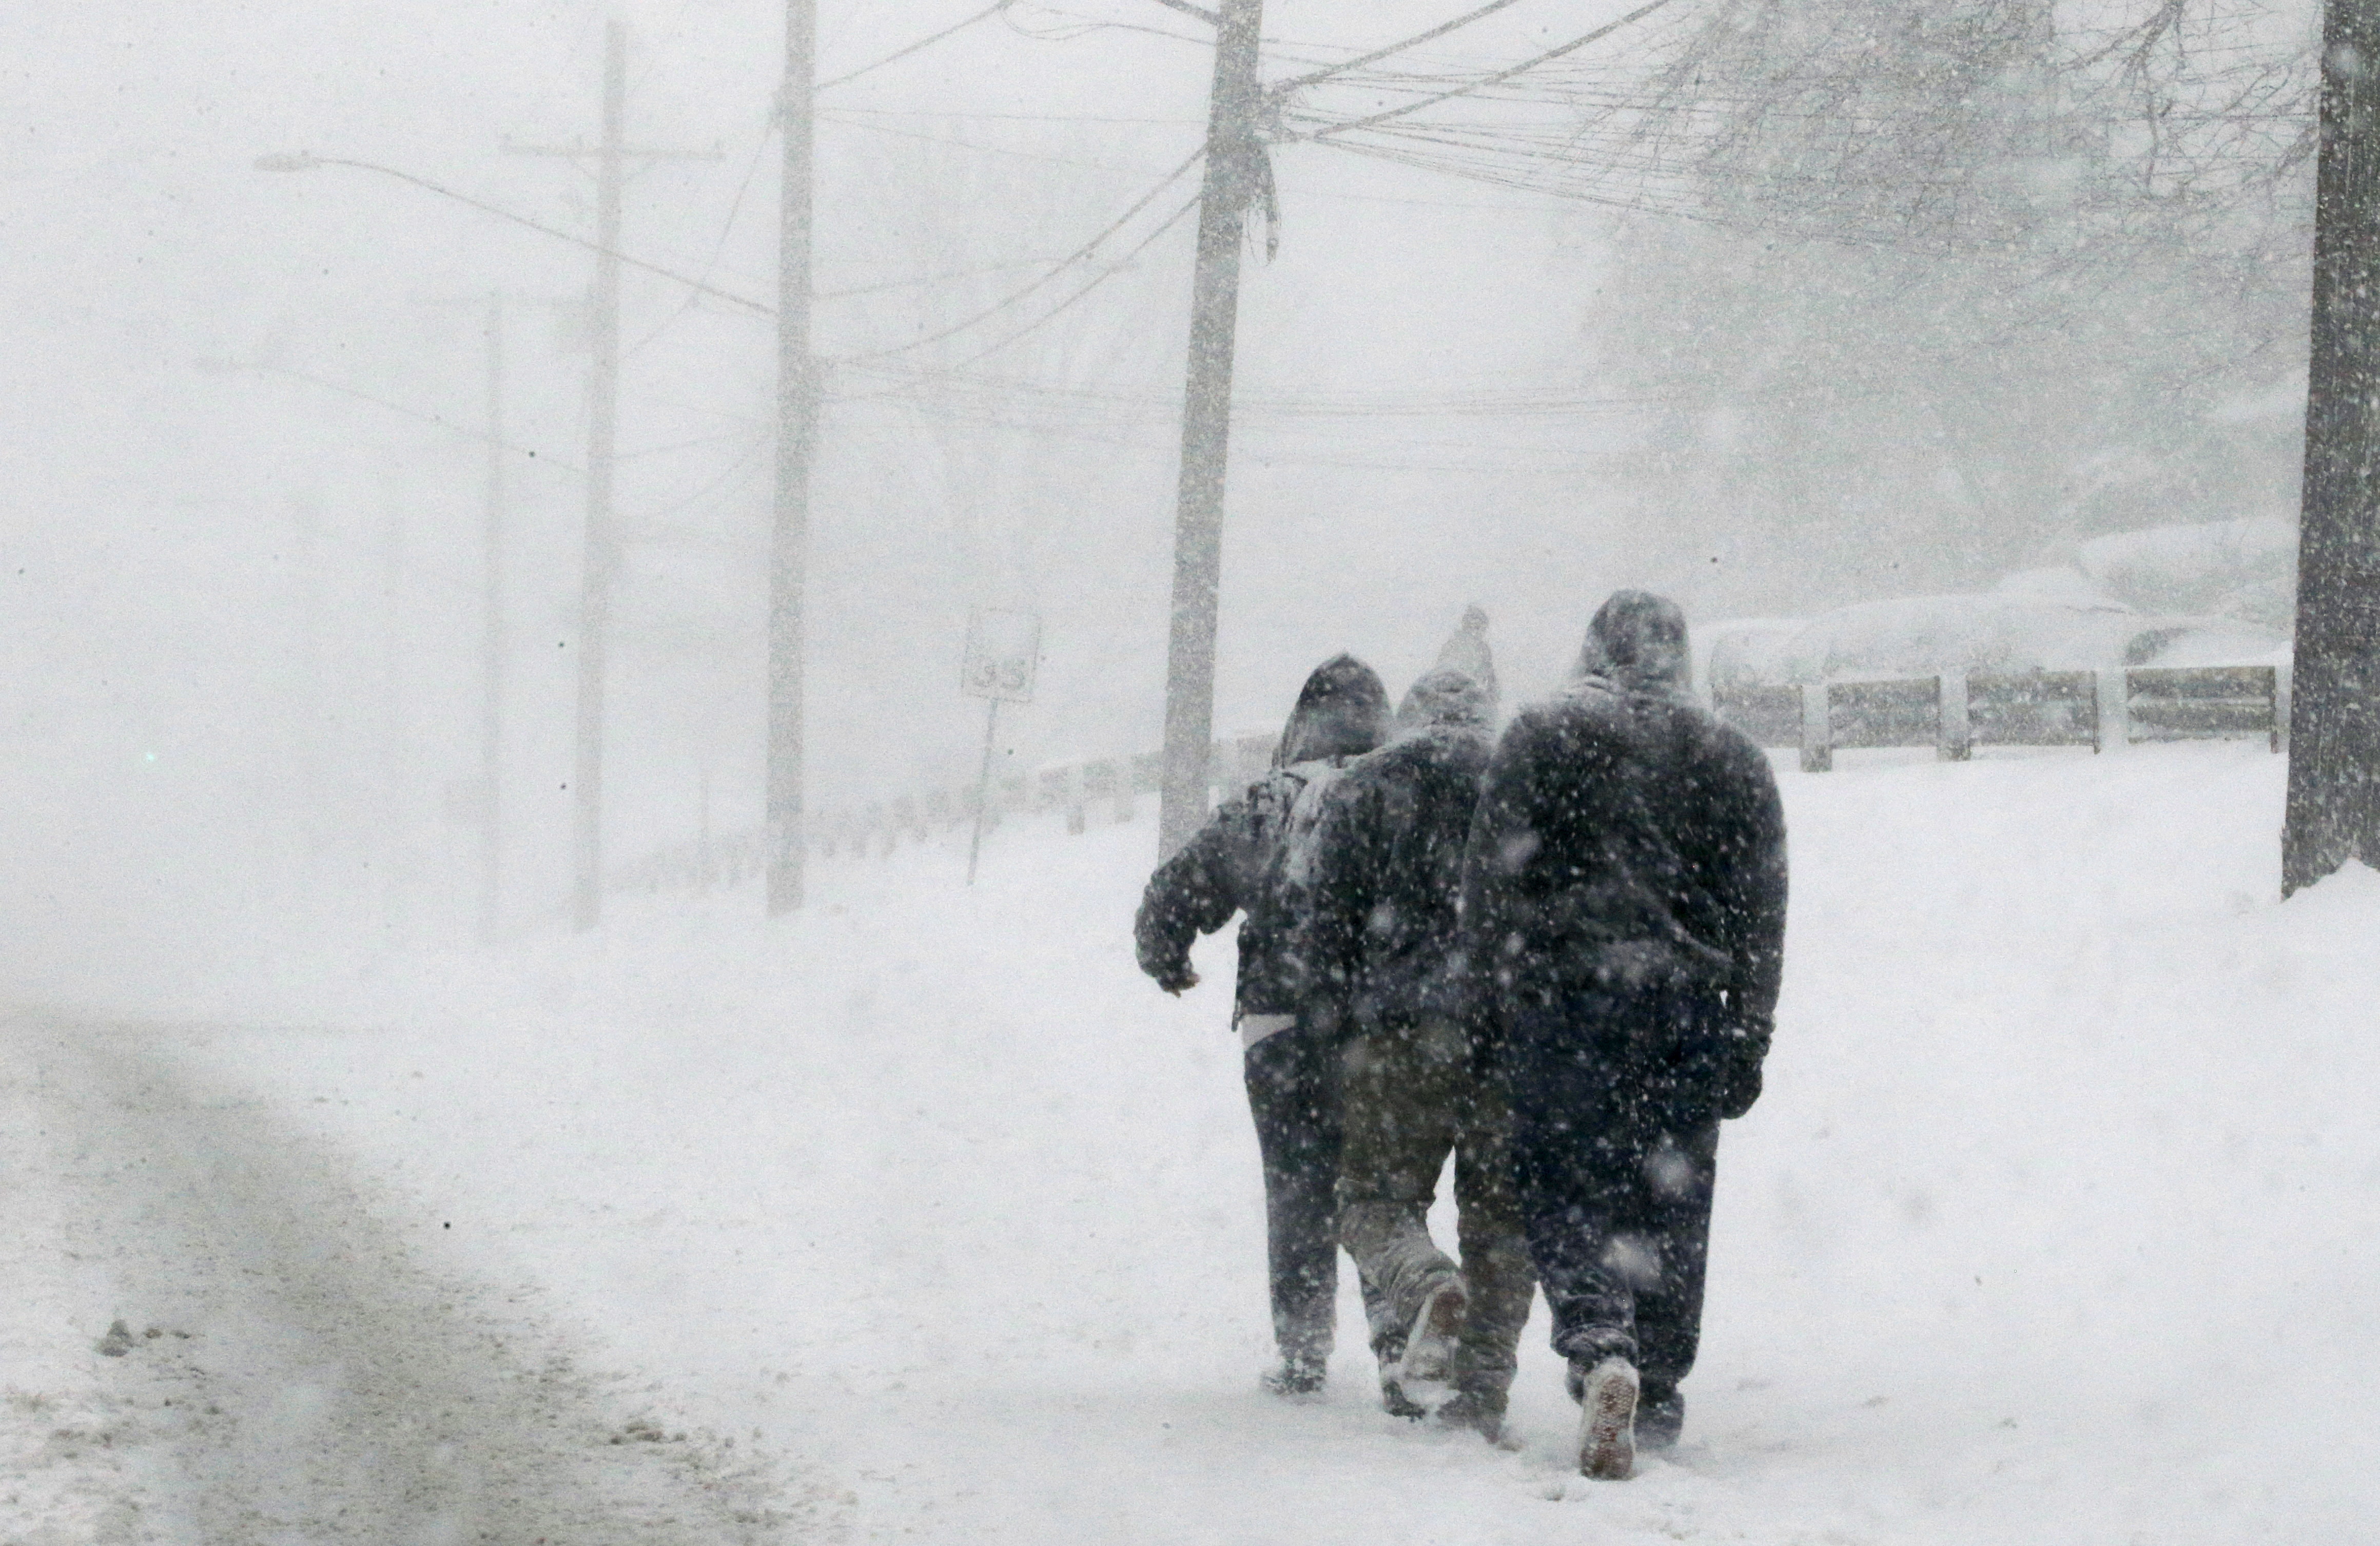 Pedestrians walk through a winter snow storm on New Hampshire Avenue in the Washington suburb of Silver Spring, Maryland